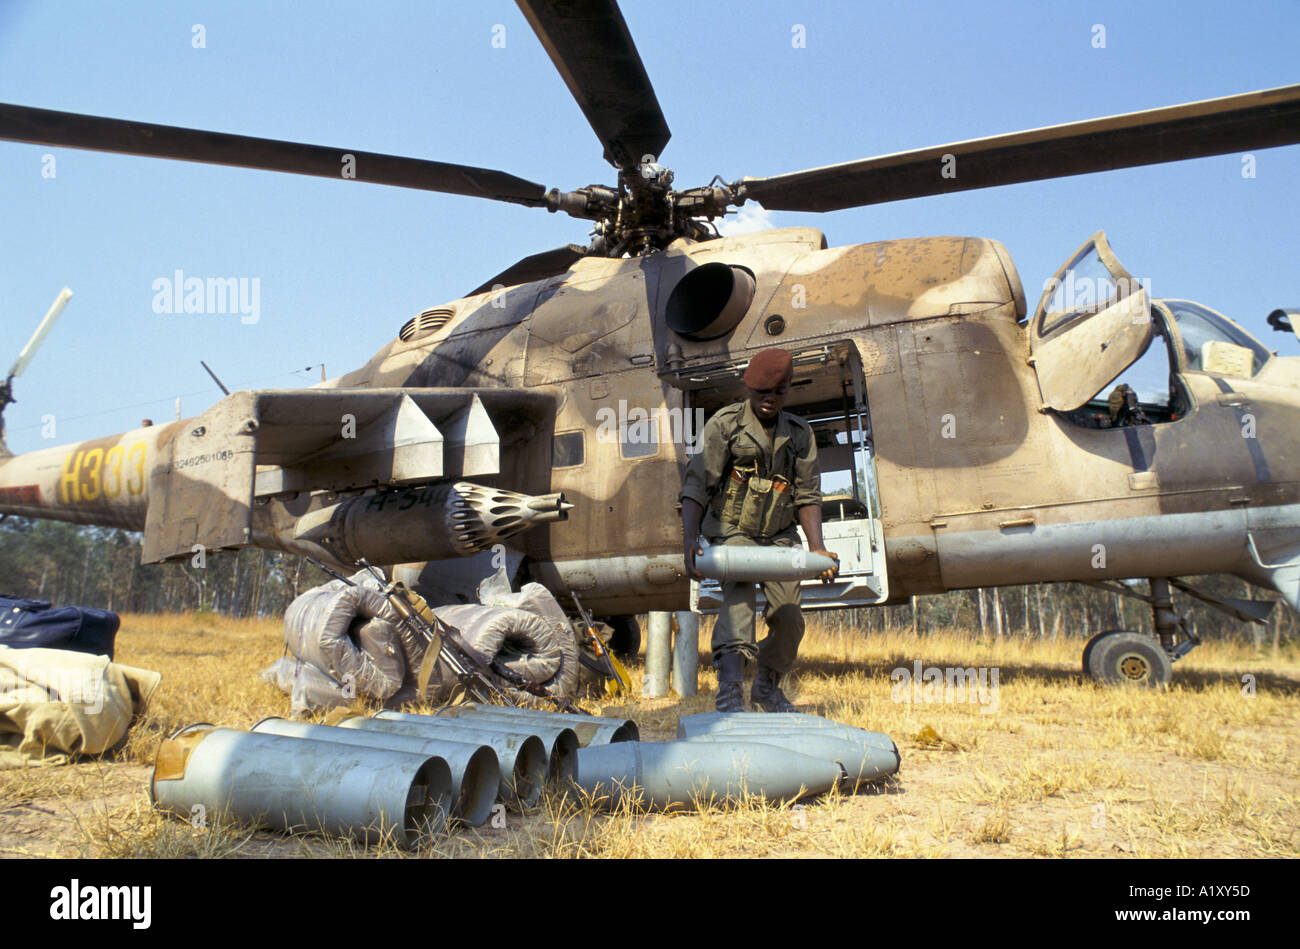 http://c8.alamy.com/comp/A1XY5D/angola-civil-war-aug-1993-soviet-made-helicopter-loaded-with-government-A1XY5D.jpg